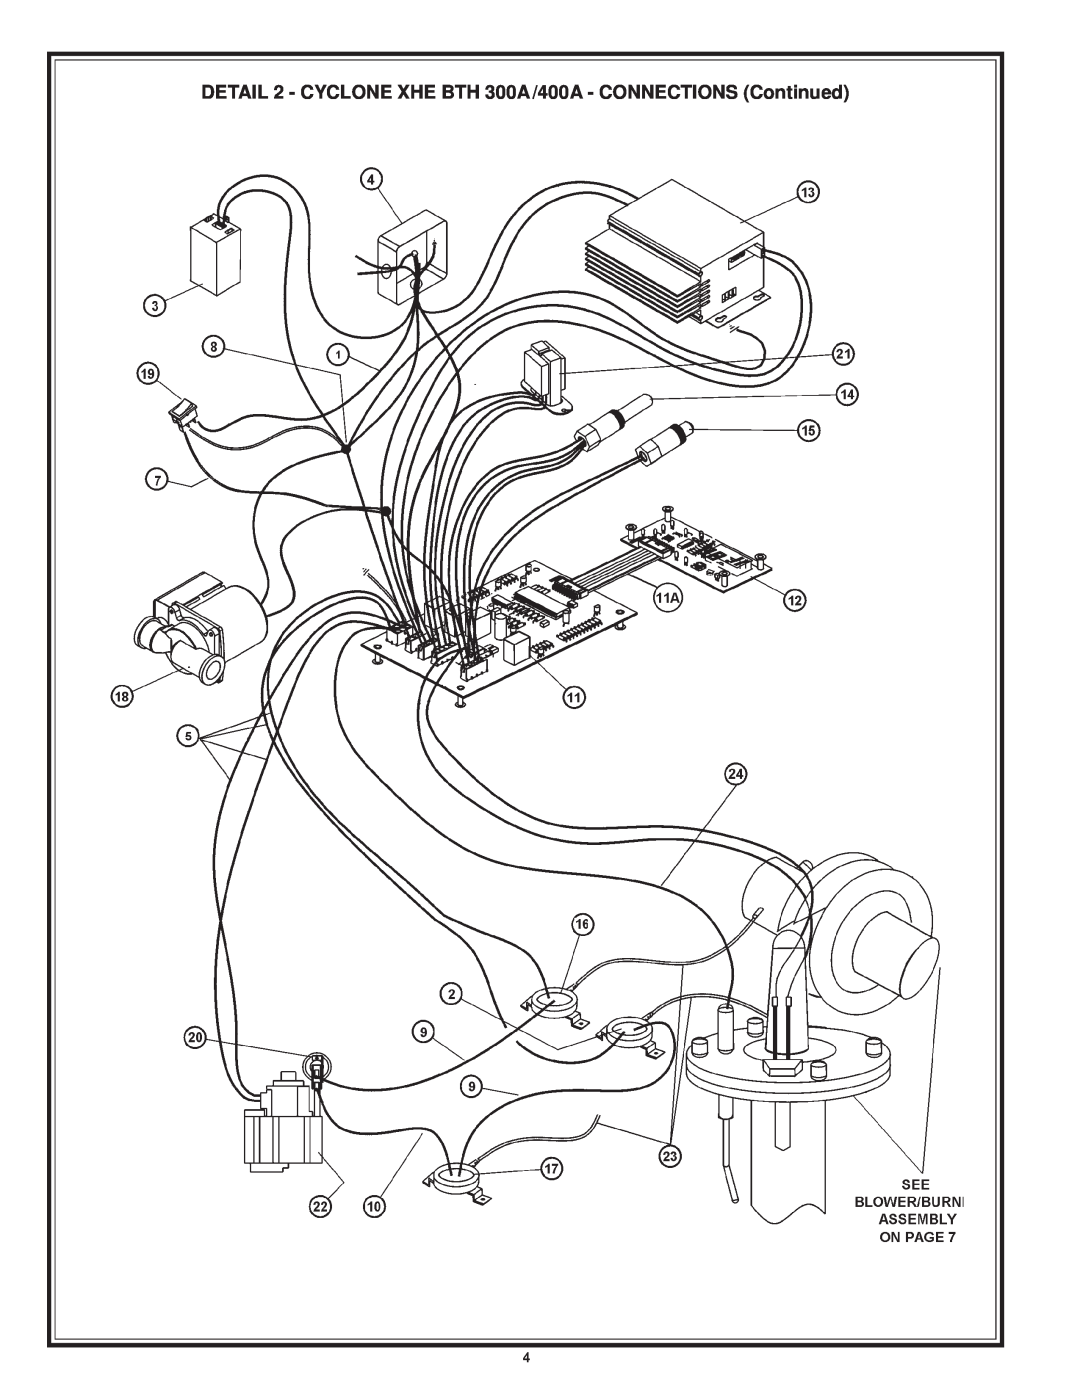 A.O. Smith 975 Series, 974 Series manual DETAIL 2 - CYCLONE XHE BTH 300A/400A - CONNECTIONS Continued 